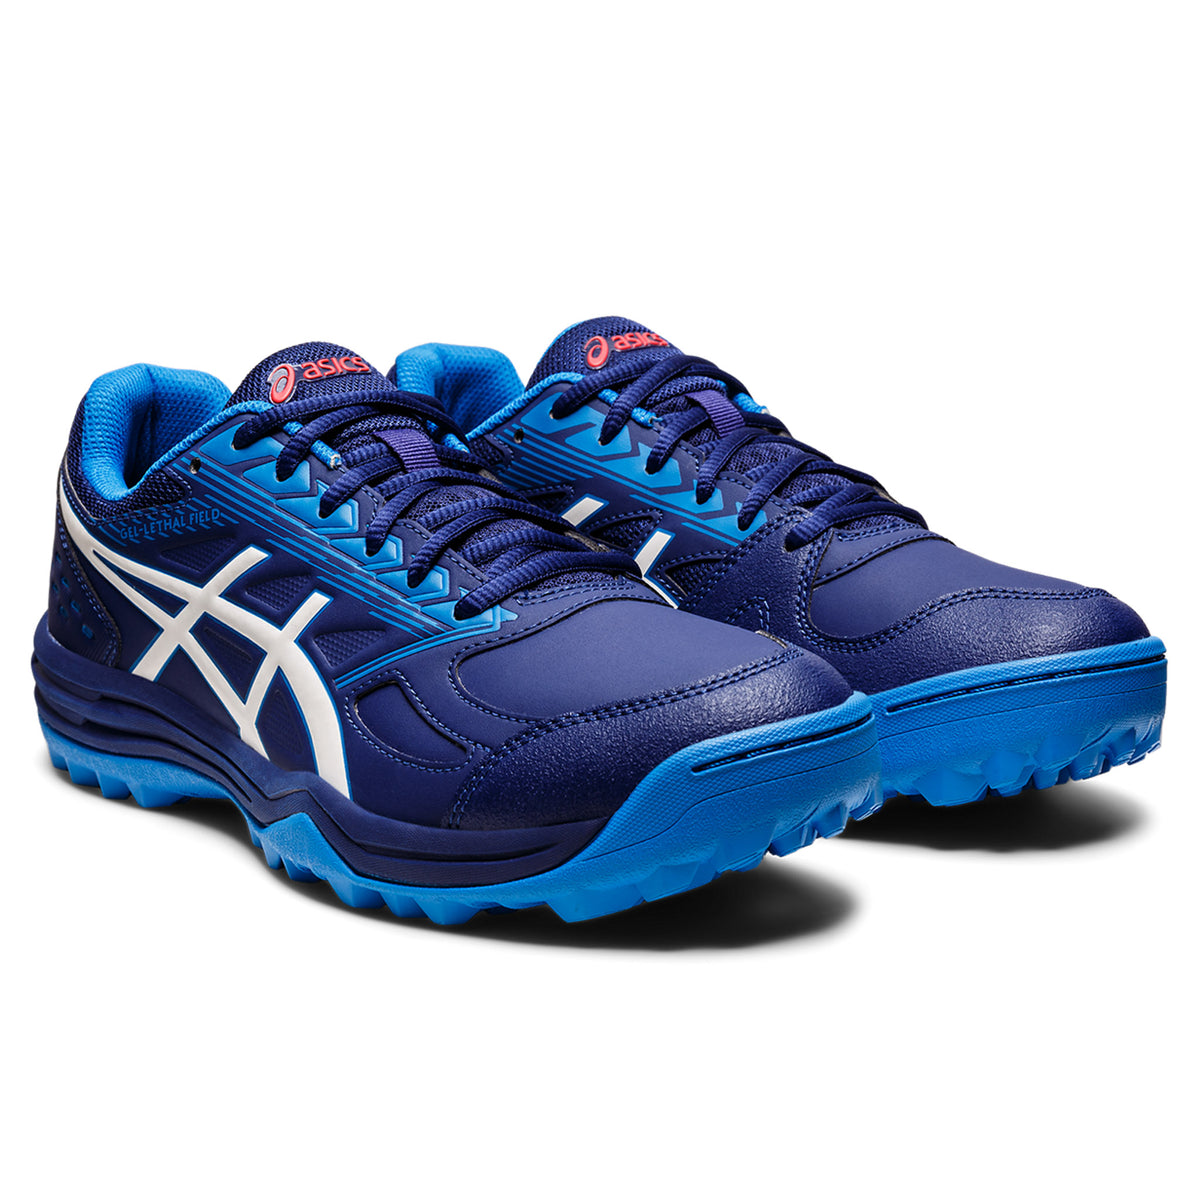 Asics Gel Lethal Field Mens Hockey Shoes: Dive Blue/White